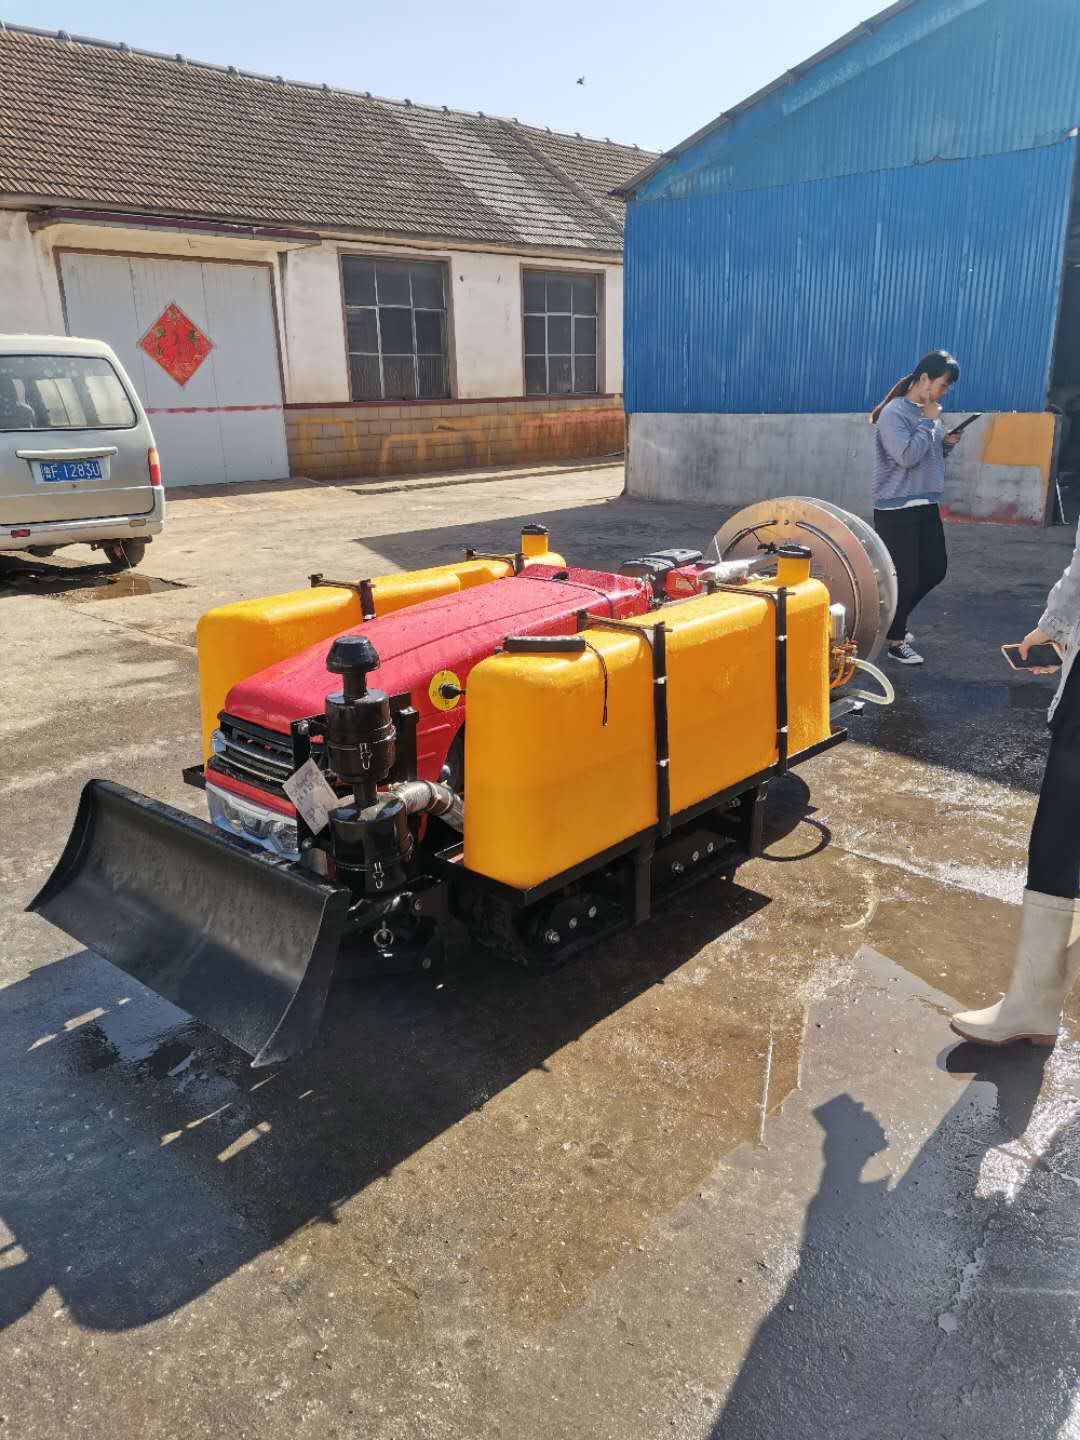 Self-propelled crawler spray insecticide machine